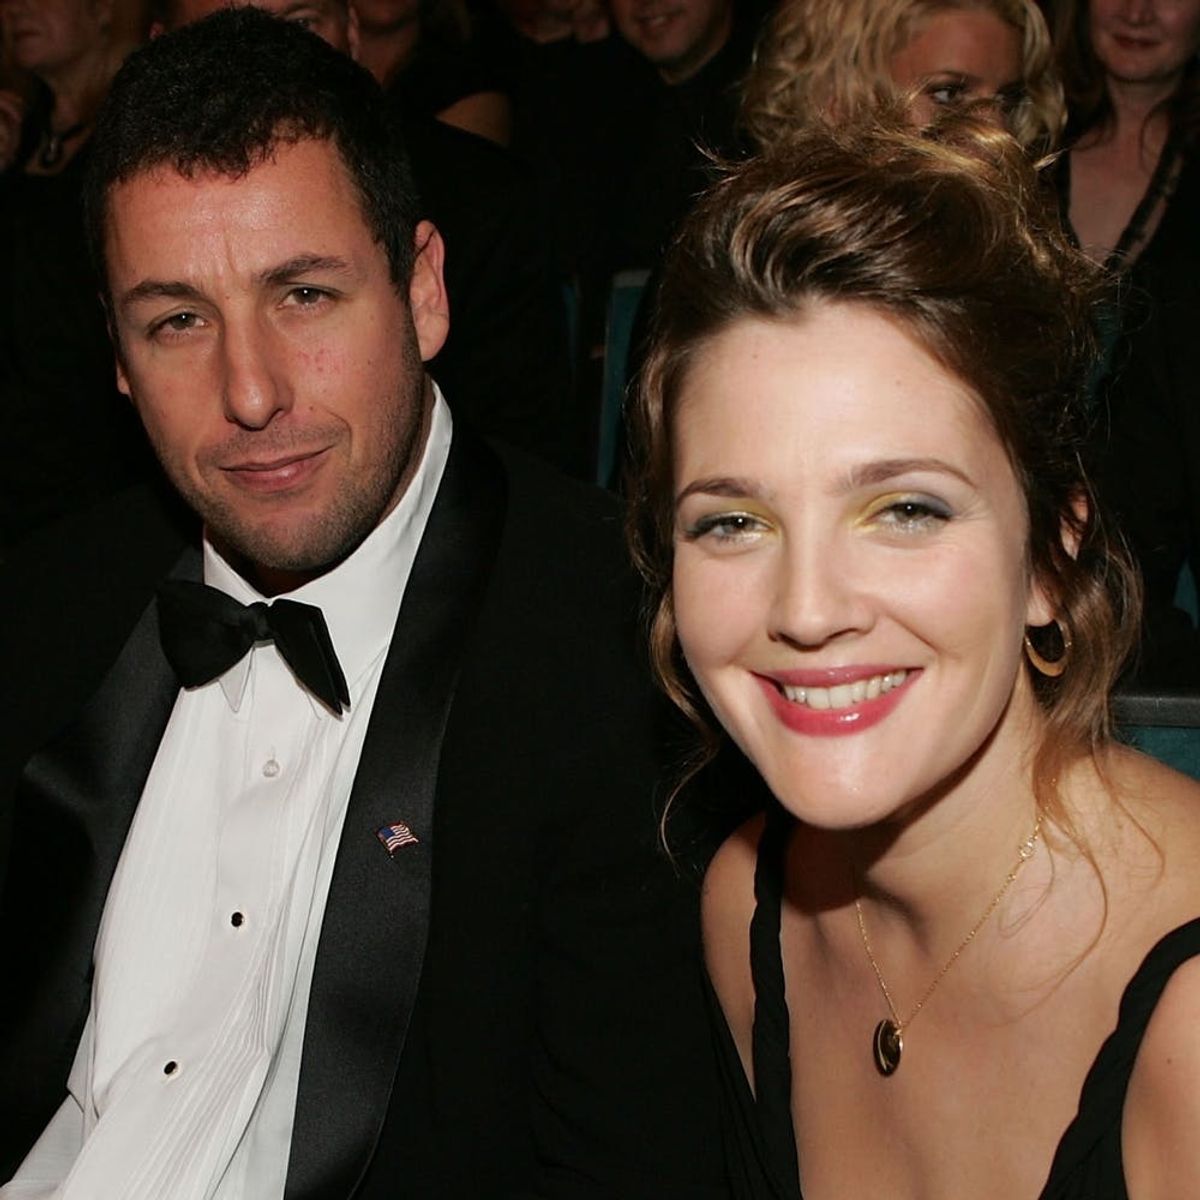 Drew Barrymore Has an Idea for Her Next Movie With Adam Sandler